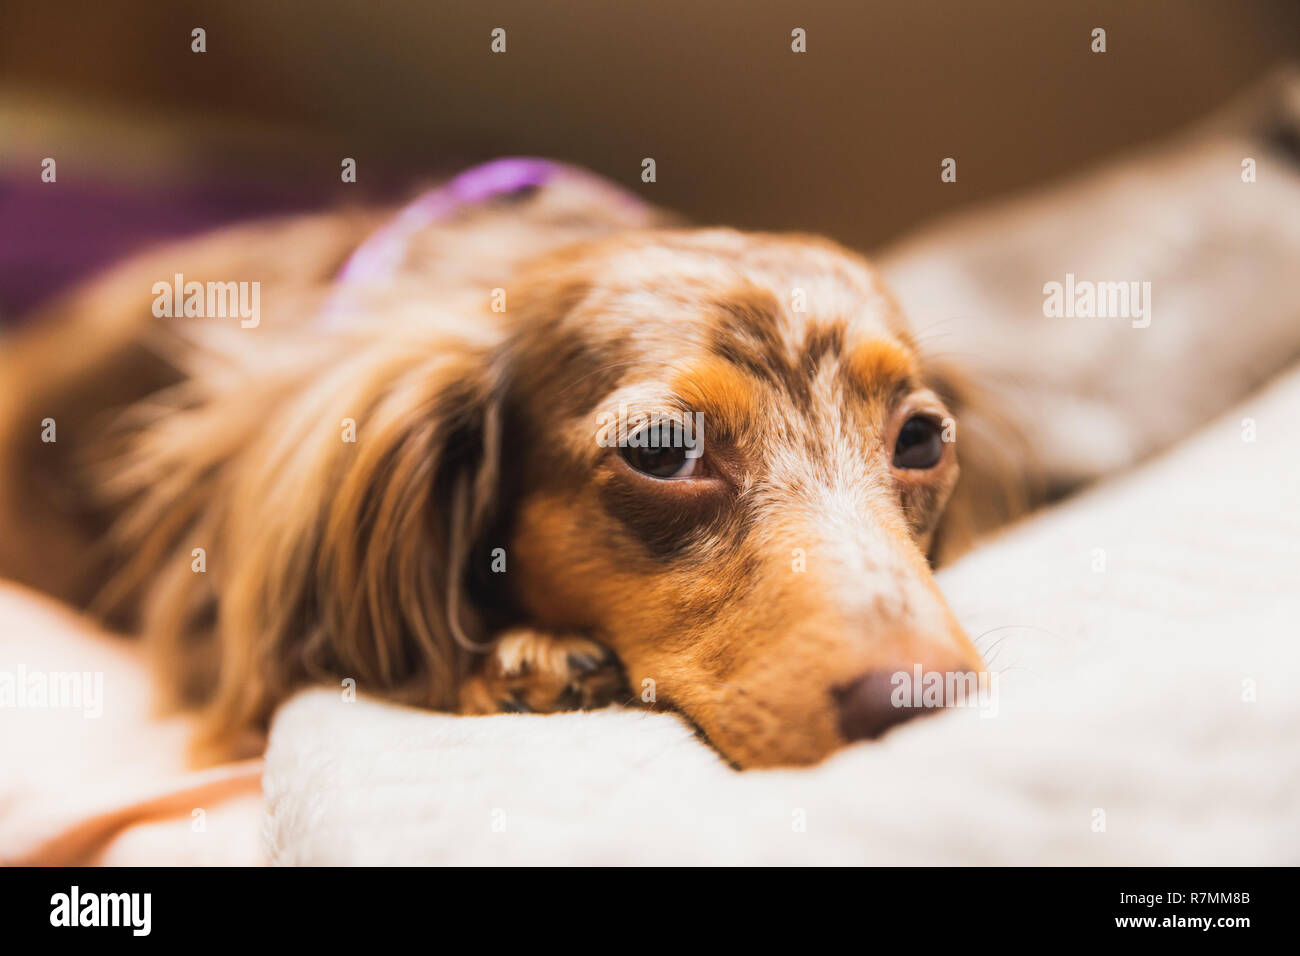 Longhaired dapple dachshund with brown and white fur laying on a bed. Stock Photo